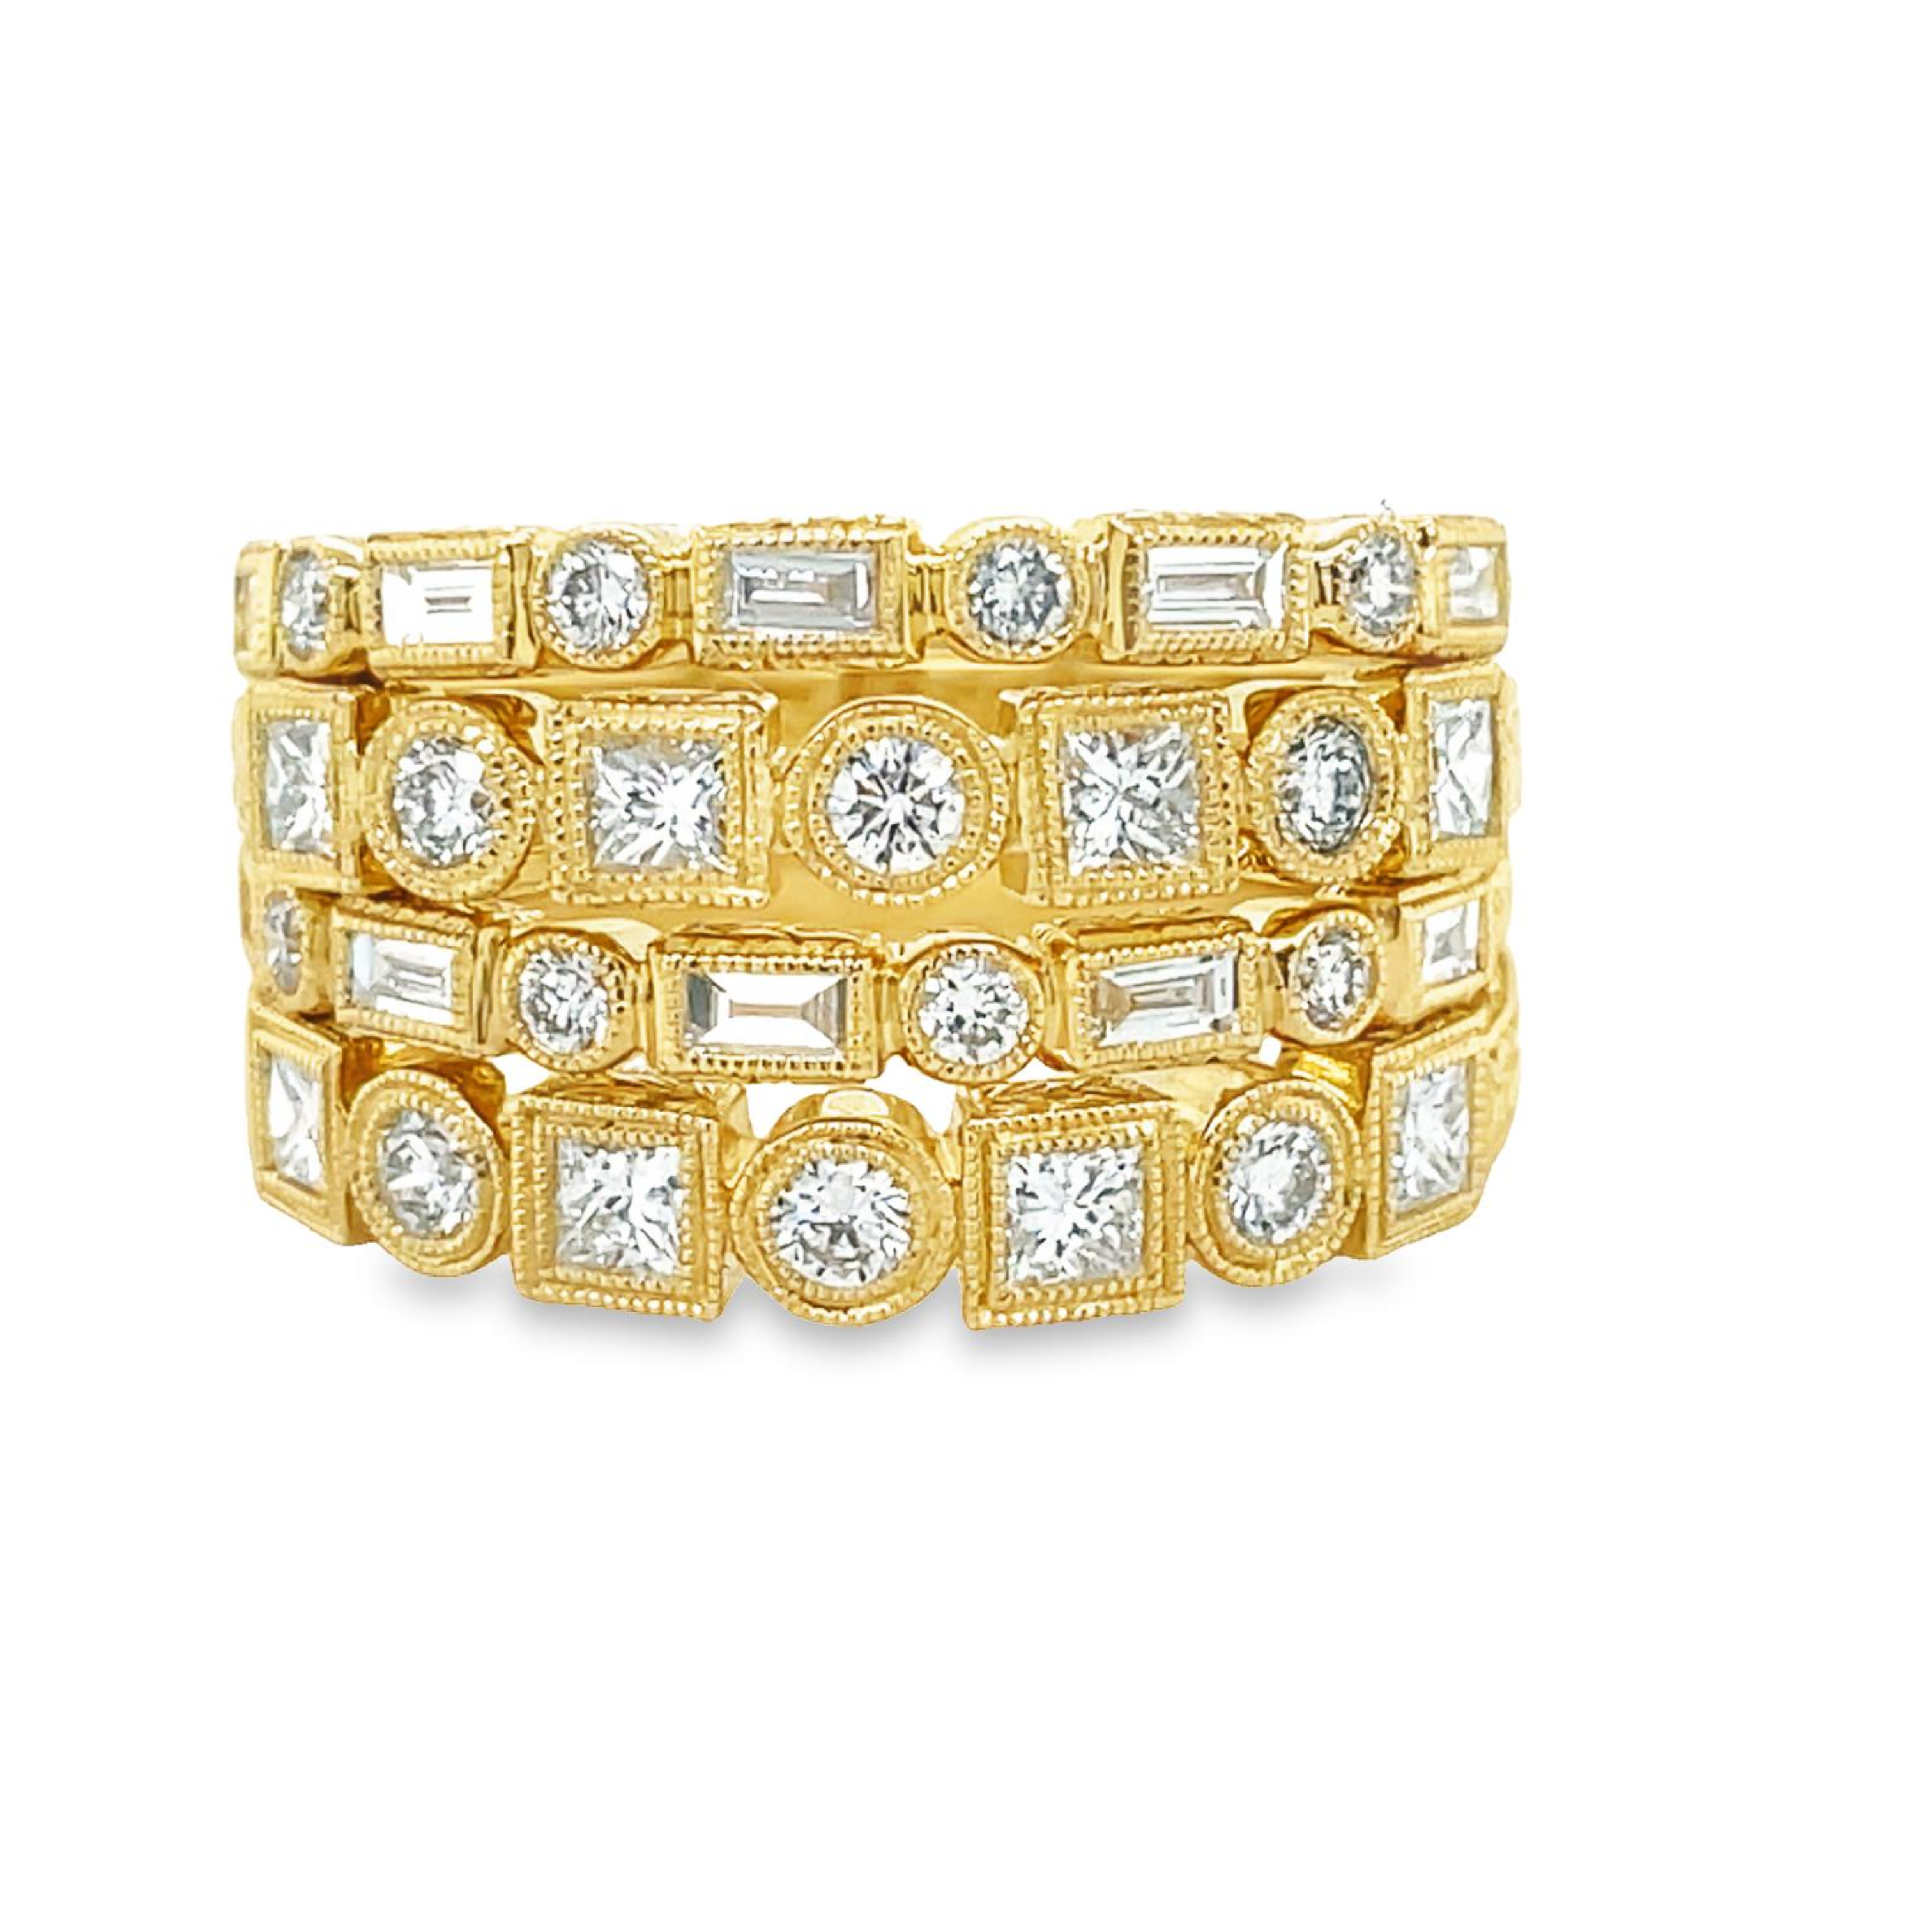 A timeless piece showcasing a classic art deco style crafted with 0.39 cts of round diamonds, set in 14k yellow gold. Available in size 6.5 and easily adjustable to any size for a custom fit. Enjoy its versatility as you stack and style it to complete your look.